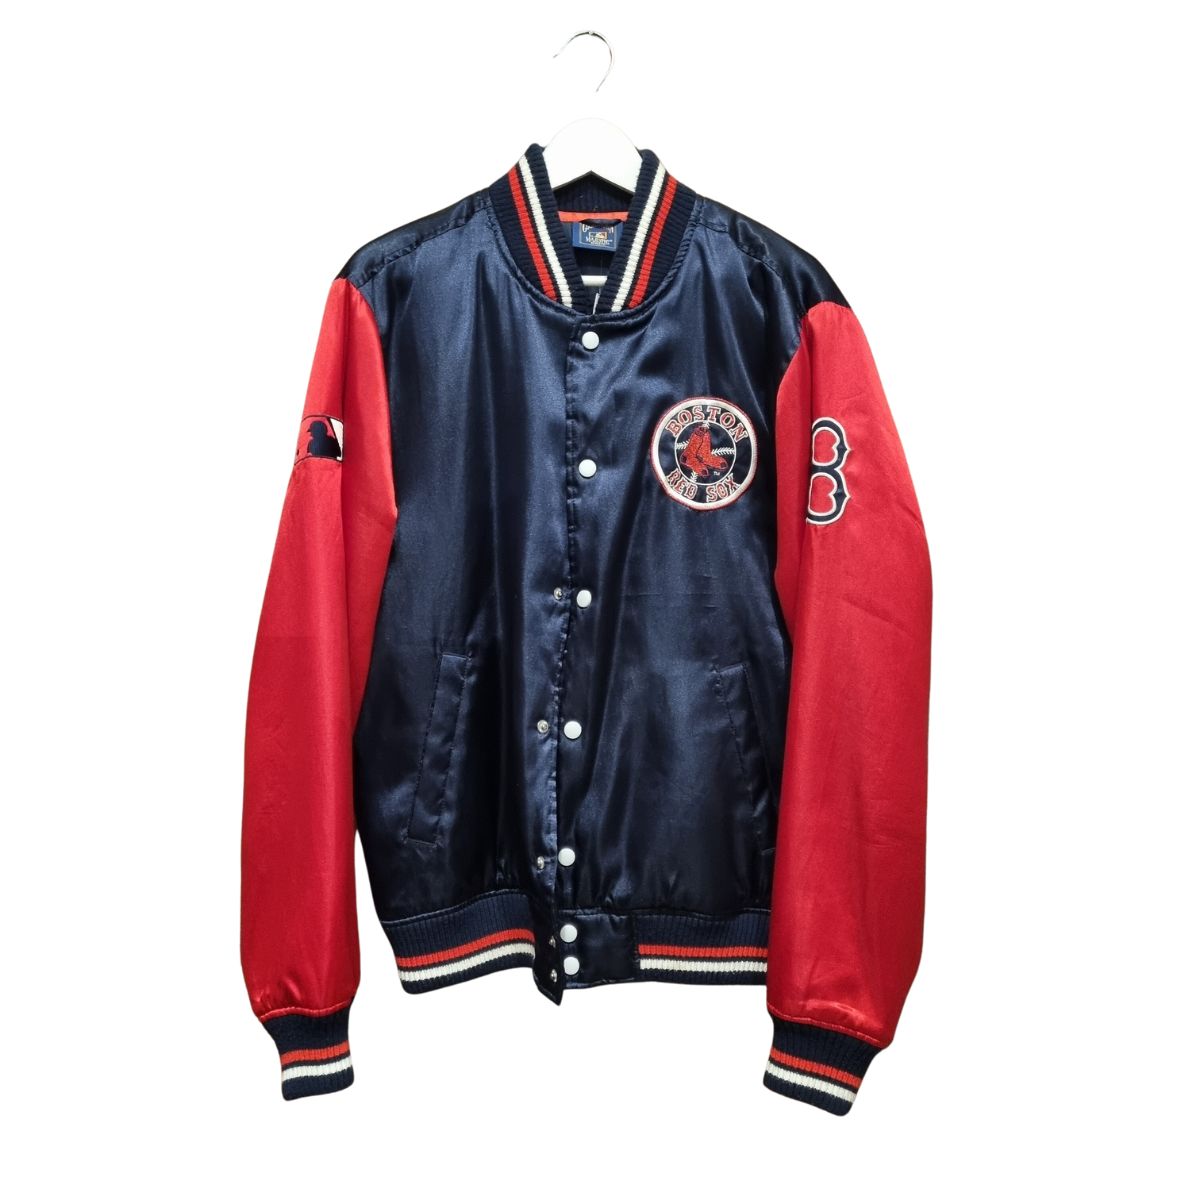 Bomber Varsity College Boston Red Sox, by Majestic